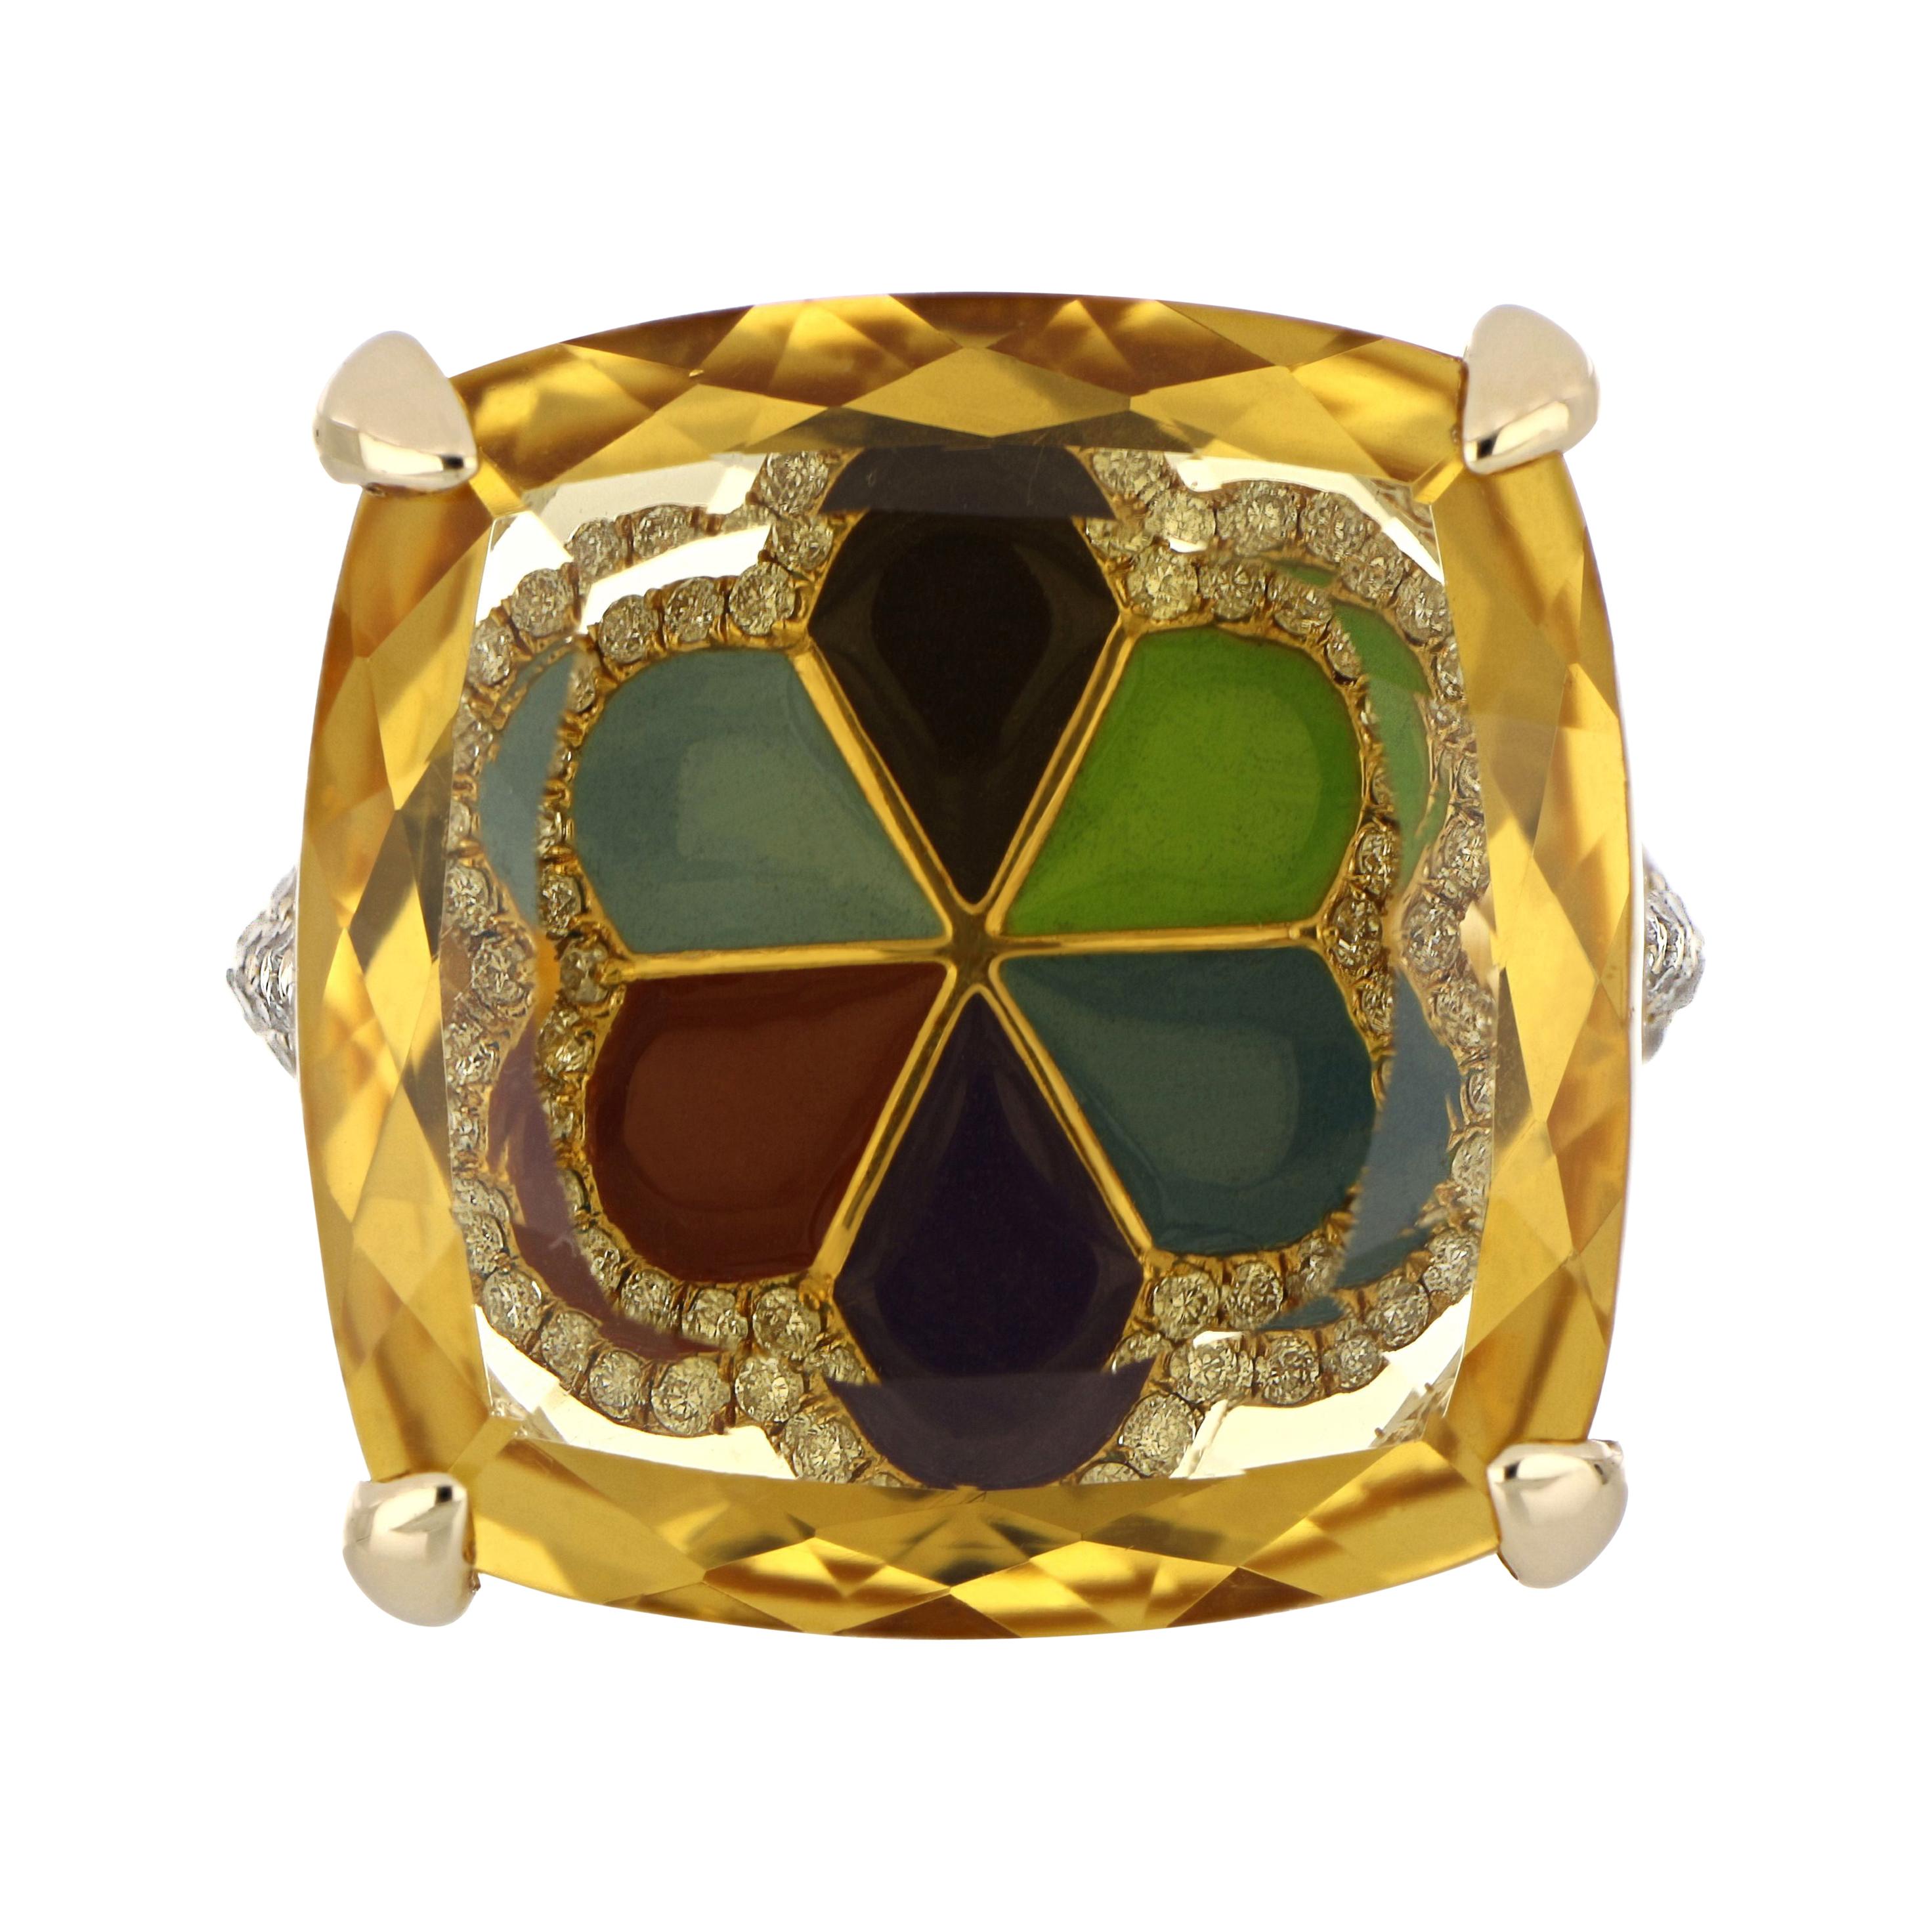 Citrine and Diamond Studded Ring in 14 Karat Yellow Gold